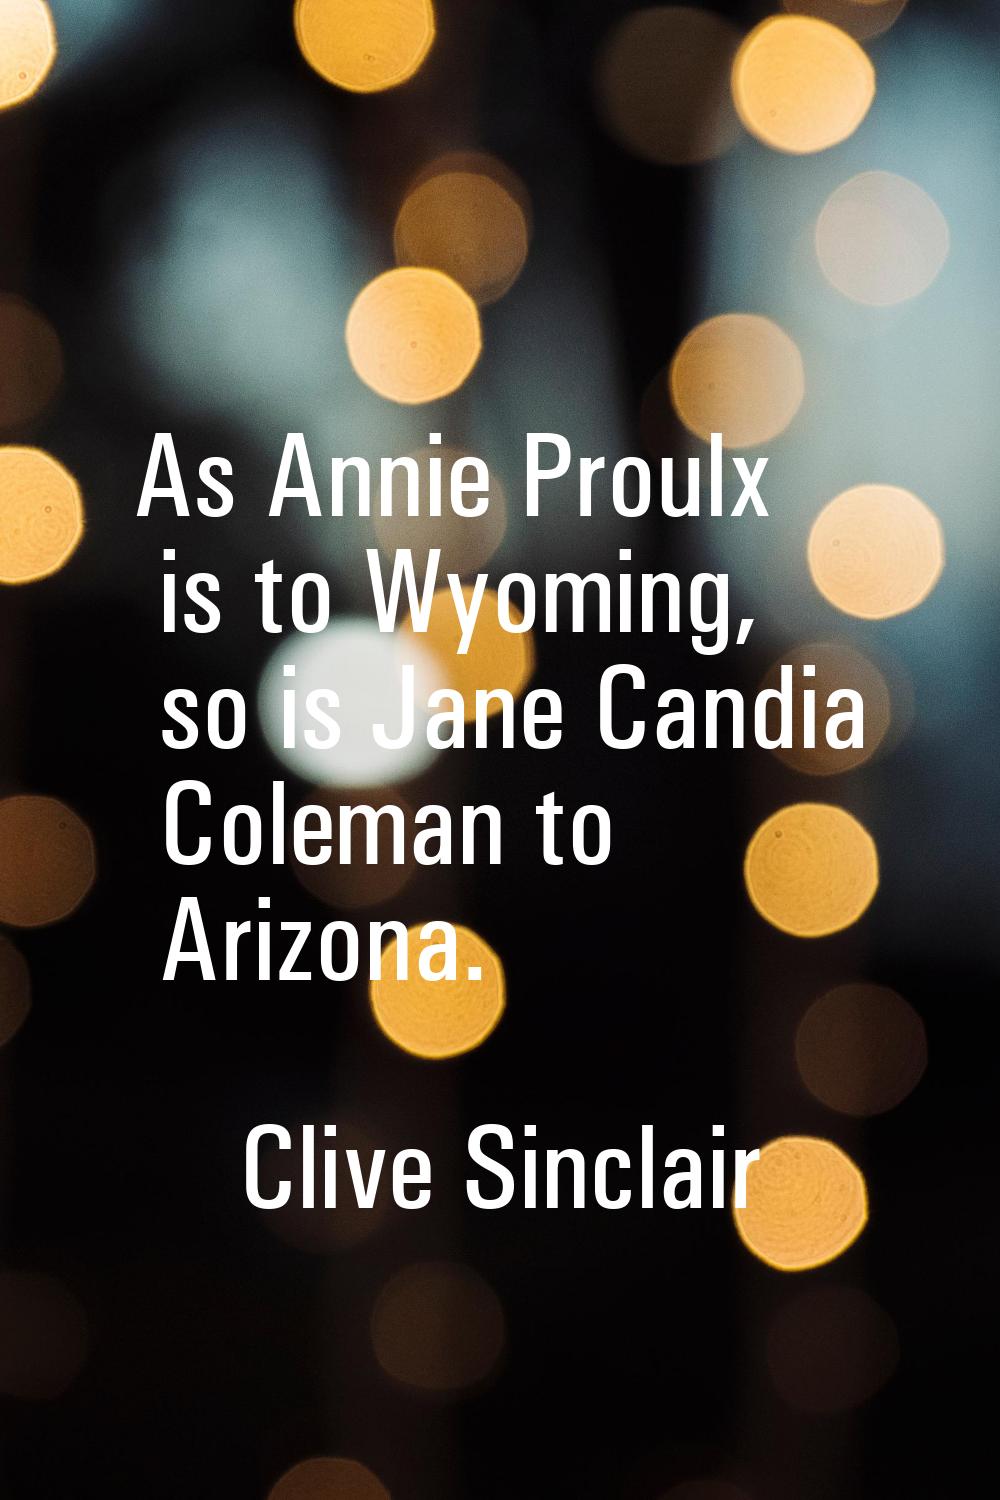 As Annie Proulx is to Wyoming, so is Jane Candia Coleman to Arizona.